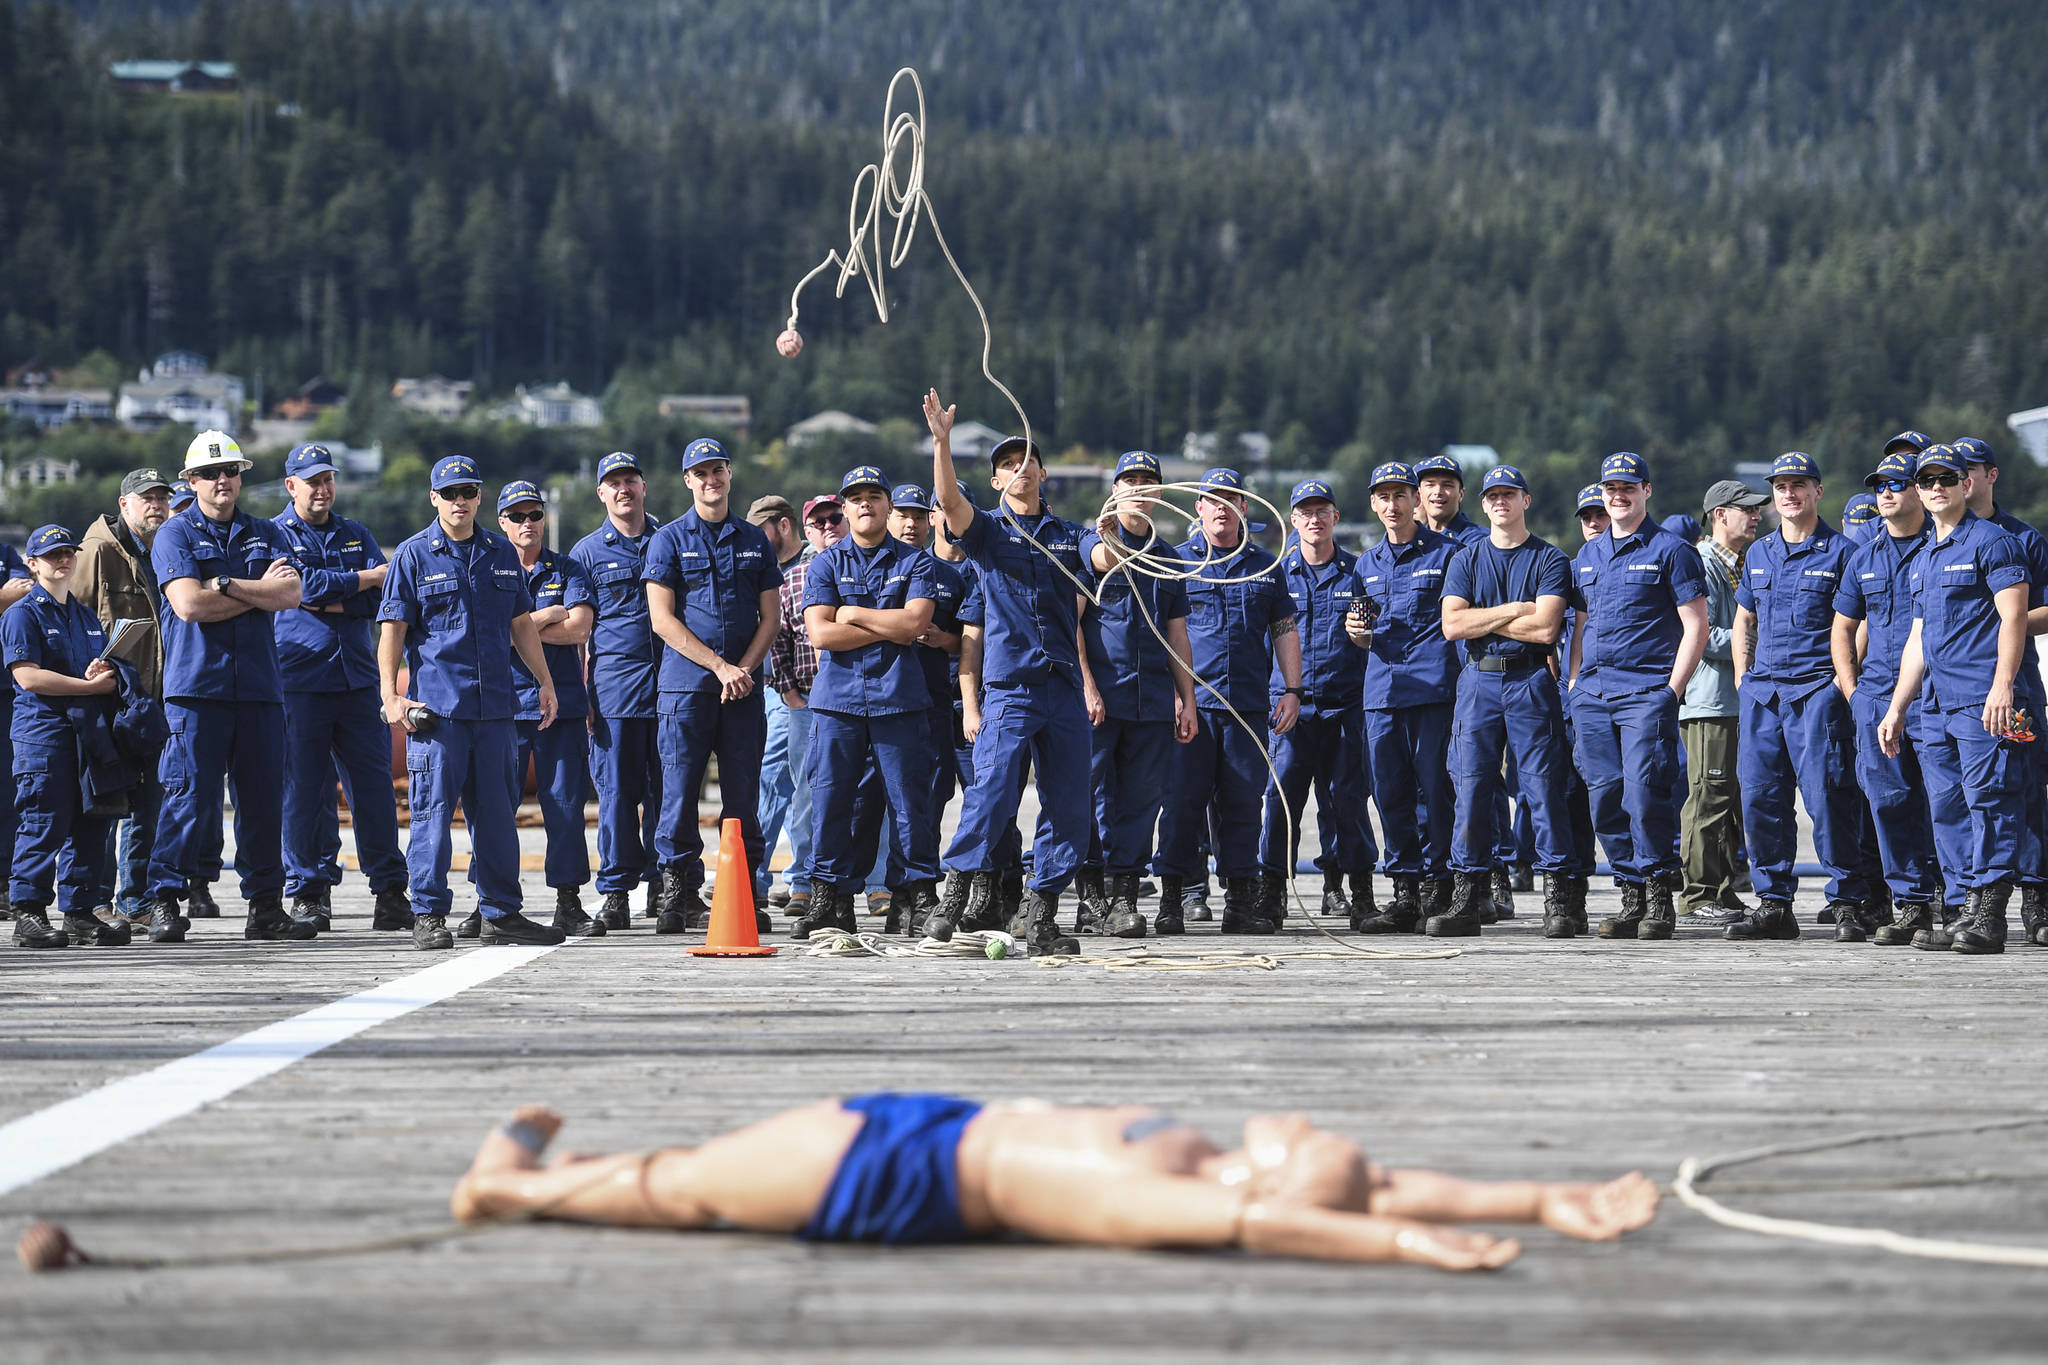 Javier Perez, of the U.S. Coast Guard Cutter Henry Blake, competes in the rope throw during the annual Buoy Tender Olympics at Station Juneau on Wednesday, Aug. 21, 2019. (Michael Penn | Juneau Empire)